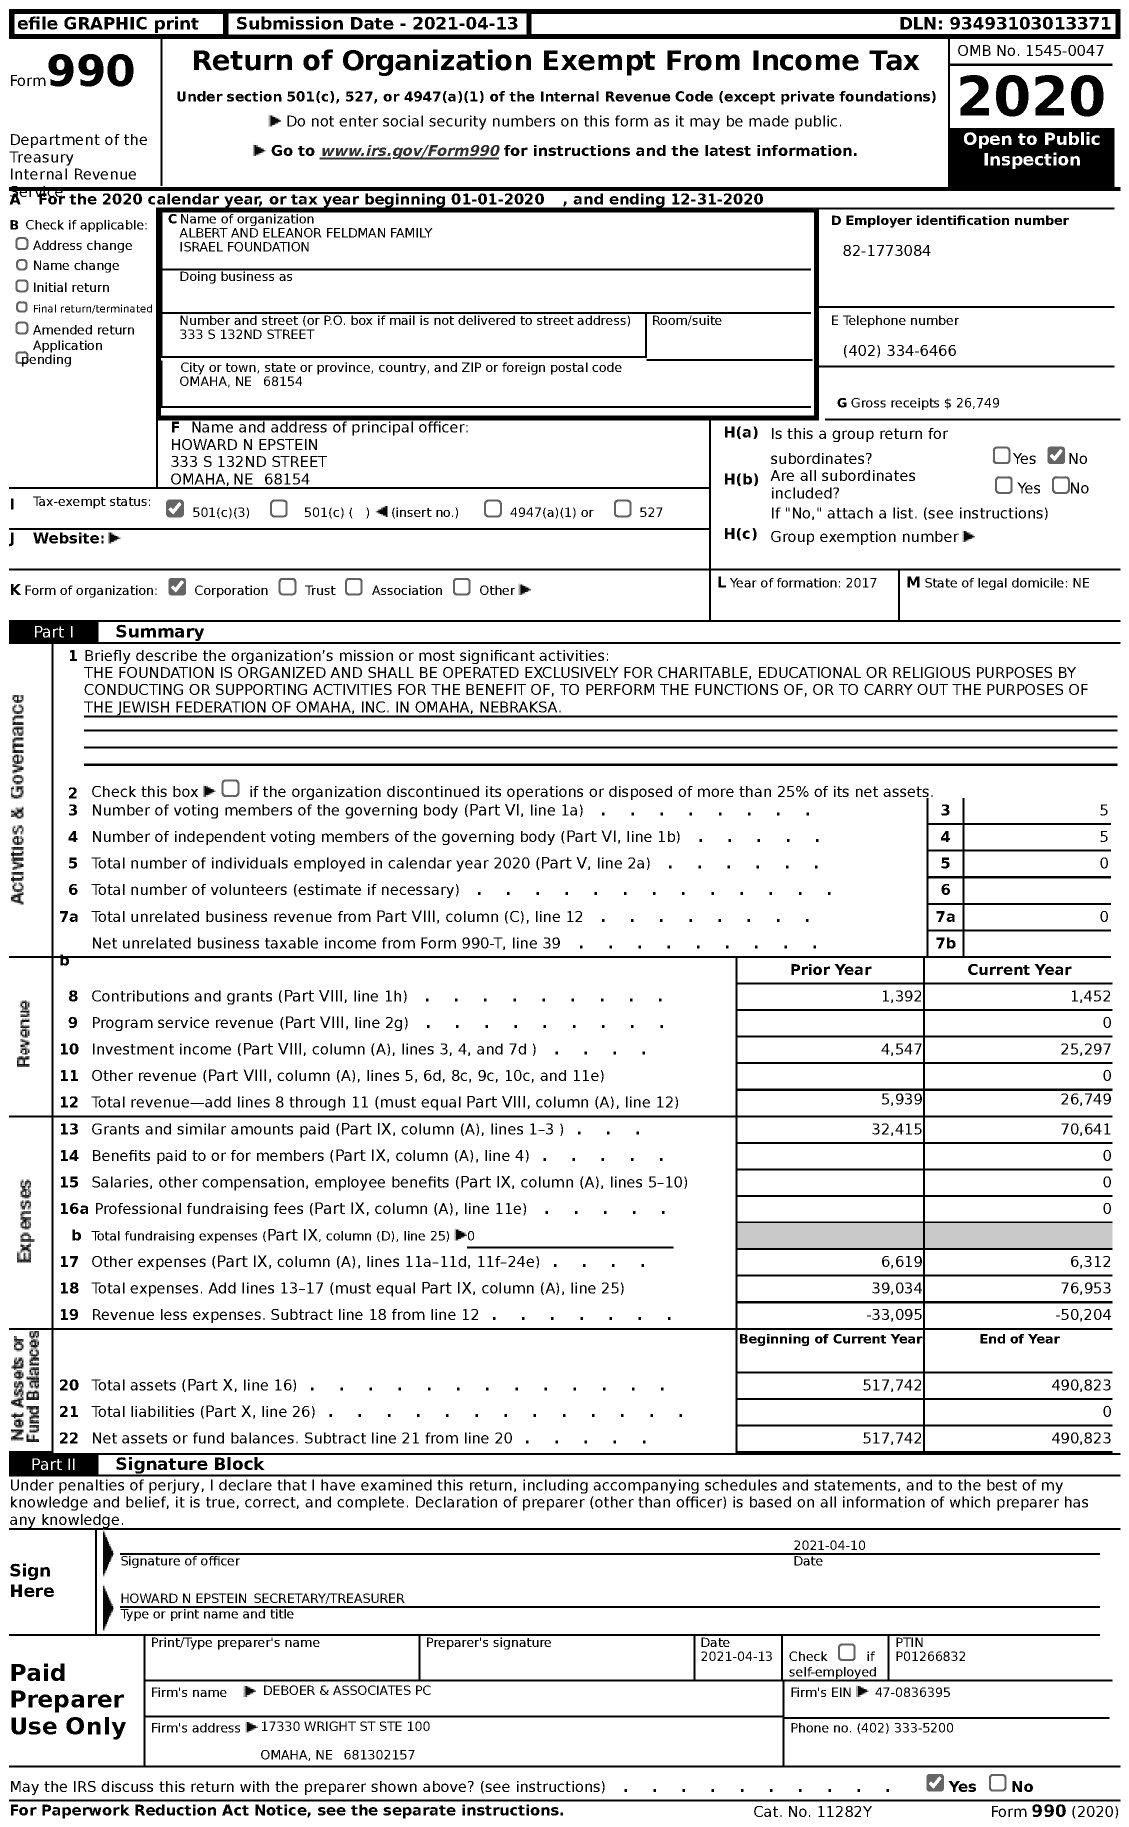 Image of first page of 2020 Form 990 for Albert and Eleanor Feldman Family Israel Foundation